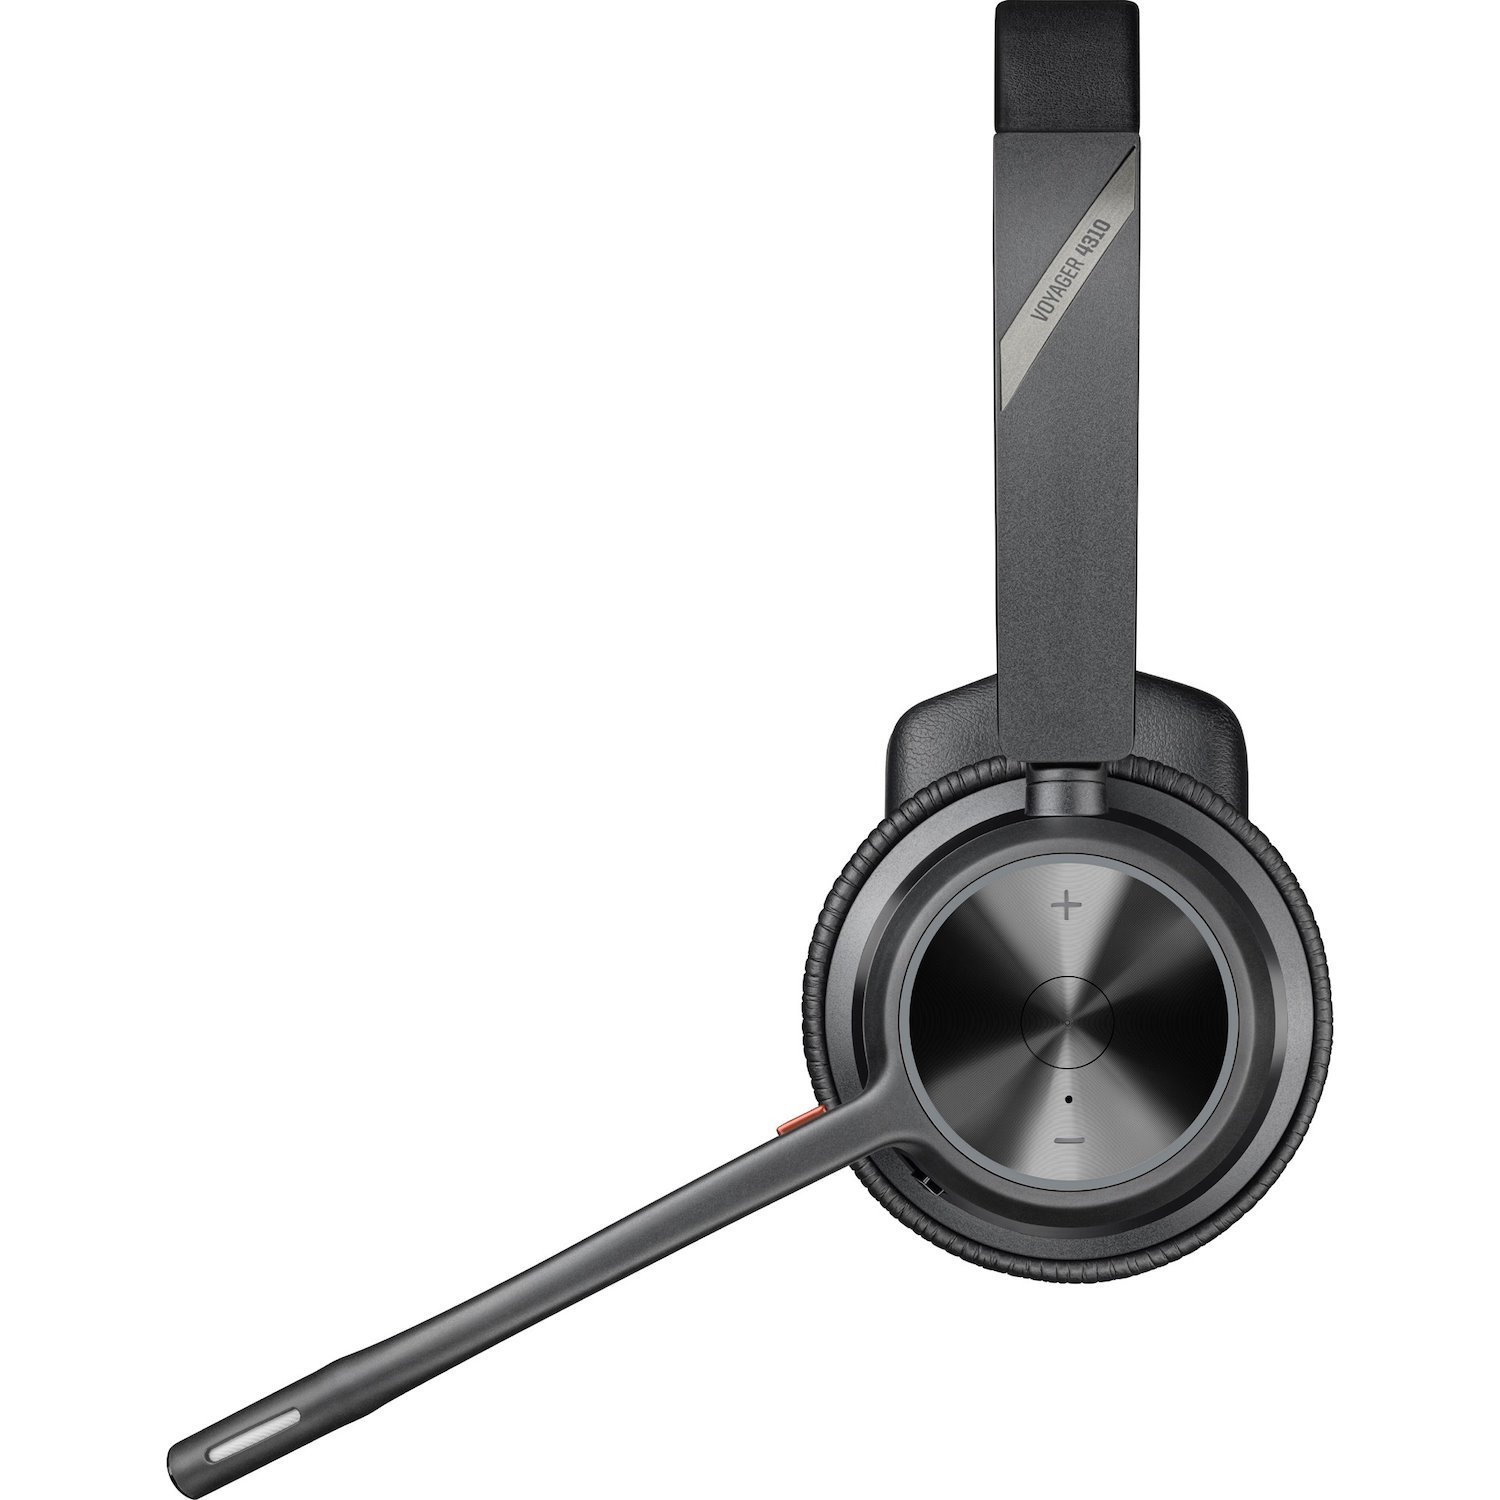 Poly Voyager 4310 USB-C Headset